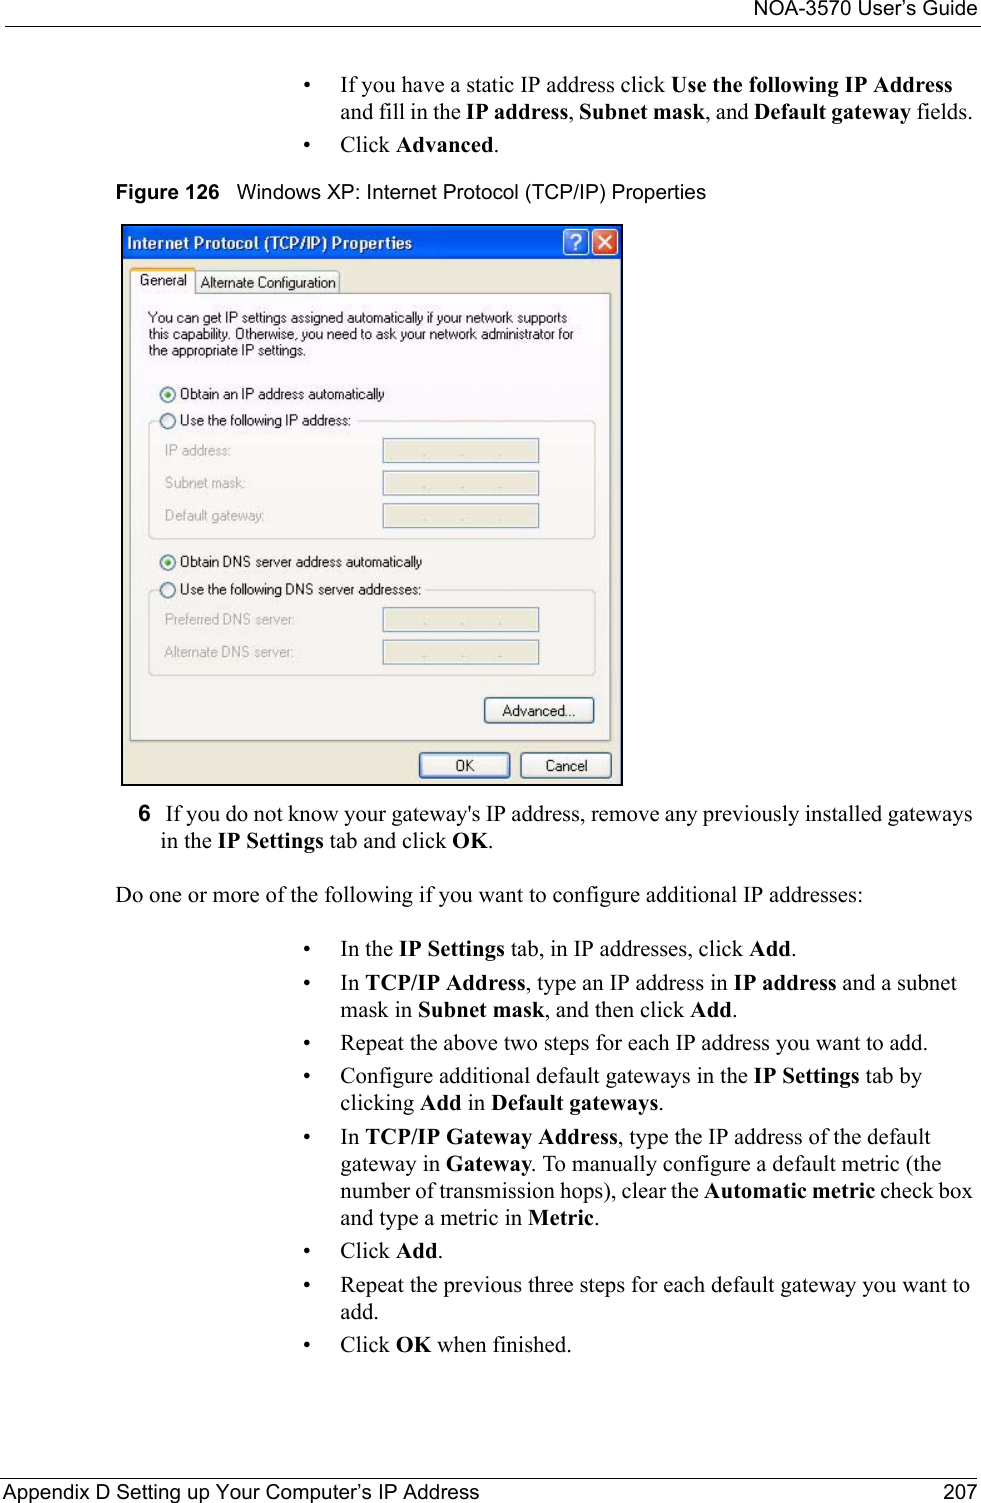 NOA-3570 User’s GuideAppendix D Setting up Your Computer’s IP Address 207• If you have a static IP address click Use the following IP Address and fill in the IP address, Subnet mask, and Default gateway fields. • Click Advanced.Figure 126   Windows XP: Internet Protocol (TCP/IP) Properties6 If you do not know your gateway&apos;s IP address, remove any previously installed gateways in the IP Settings tab and click OK.Do one or more of the following if you want to configure additional IP addresses:•In the IP Settings tab, in IP addresses, click Add.•In TCP/IP Address, type an IP address in IP address and a subnet mask in Subnet mask, and then click Add.• Repeat the above two steps for each IP address you want to add.• Configure additional default gateways in the IP Settings tab by clicking Add in Default gateways.•In TCP/IP Gateway Address, type the IP address of the default gateway in Gateway. To manually configure a default metric (the number of transmission hops), clear the Automatic metric check box and type a metric in Metric.• Click Add. • Repeat the previous three steps for each default gateway you want to add.• Click OK when finished.